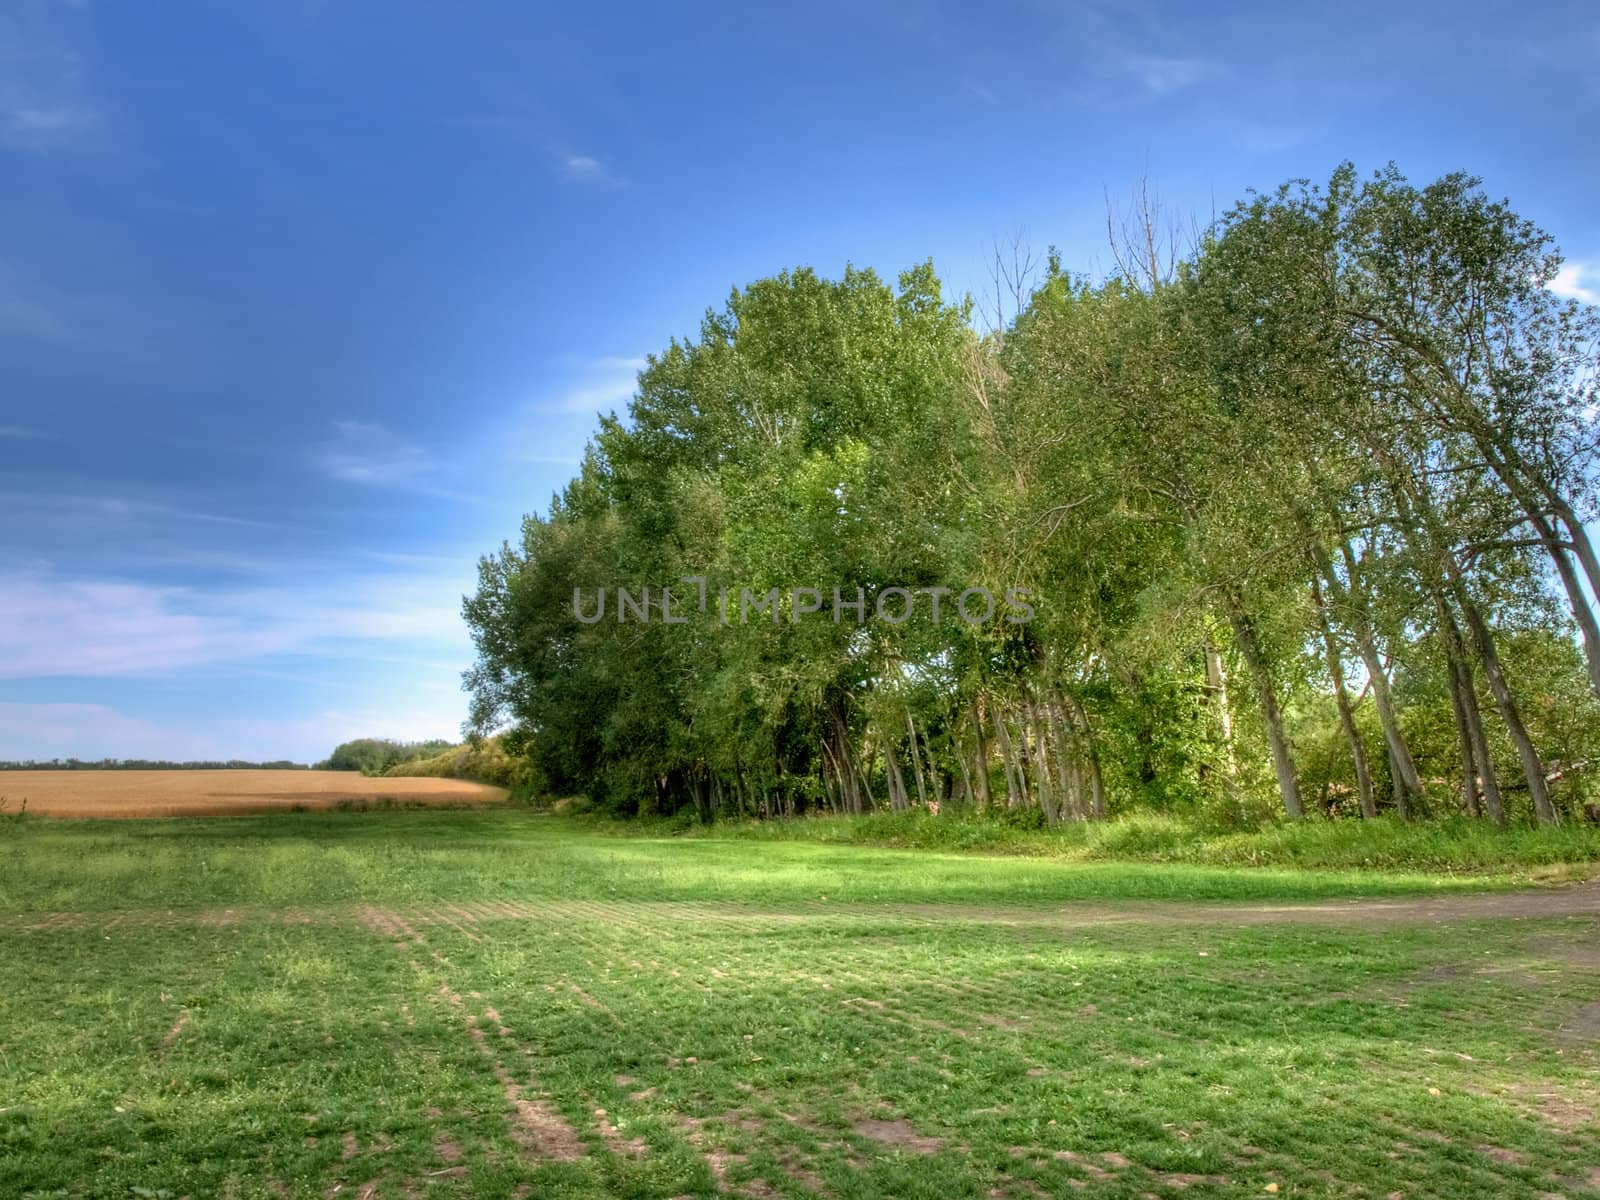 Line of trees along a grass and wheat field in rural Alberta.